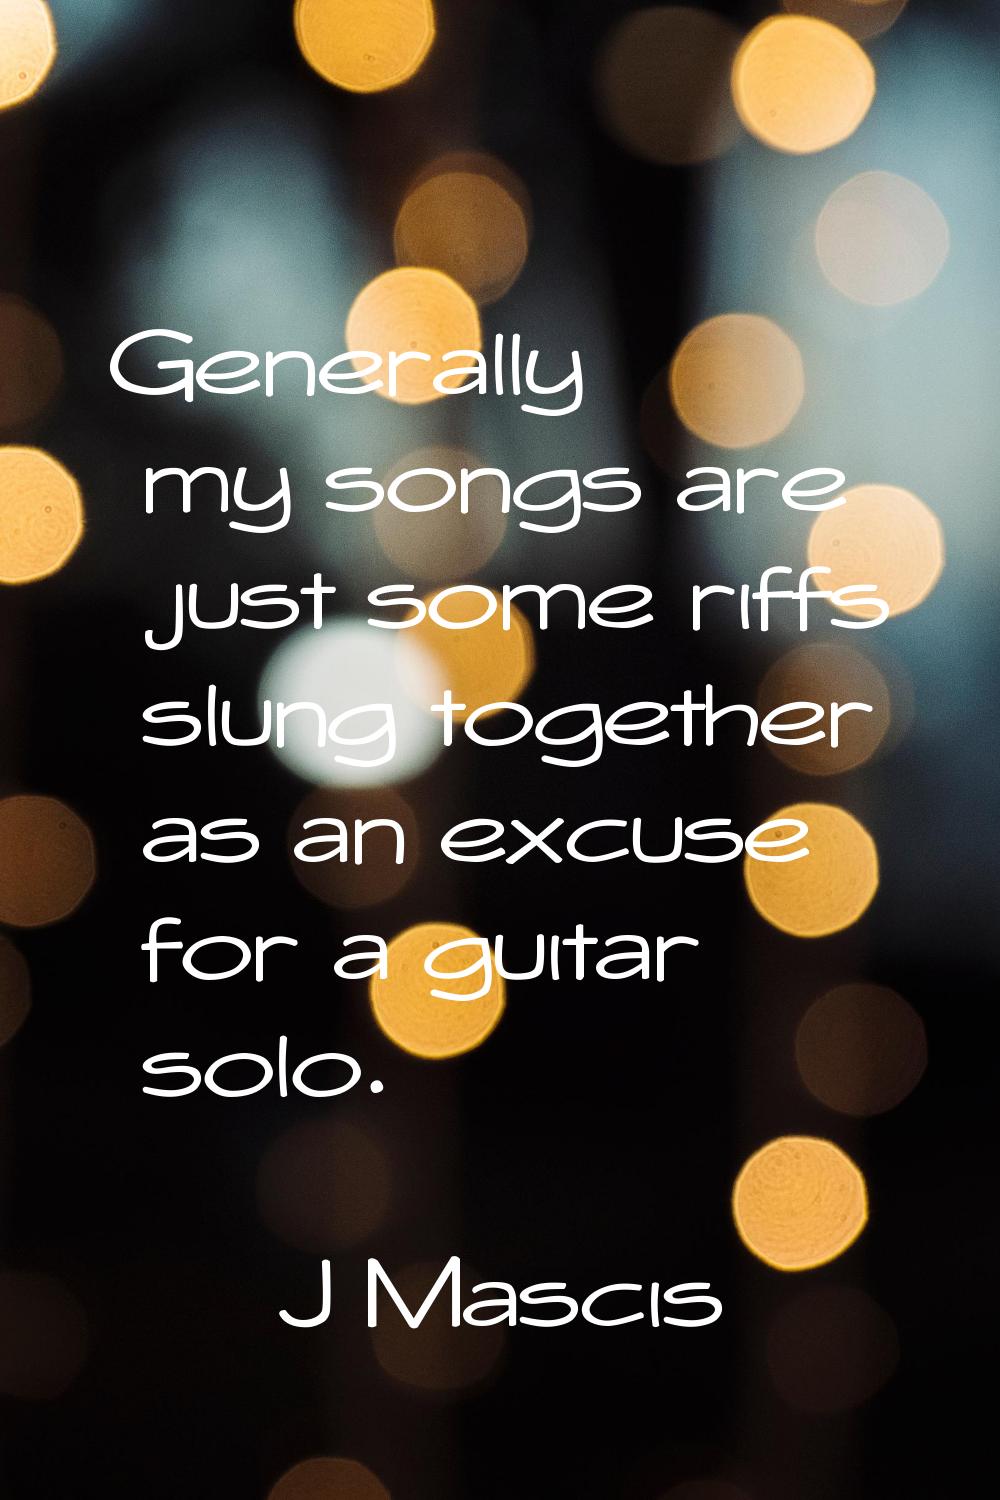 Generally my songs are just some riffs slung together as an excuse for a guitar solo.